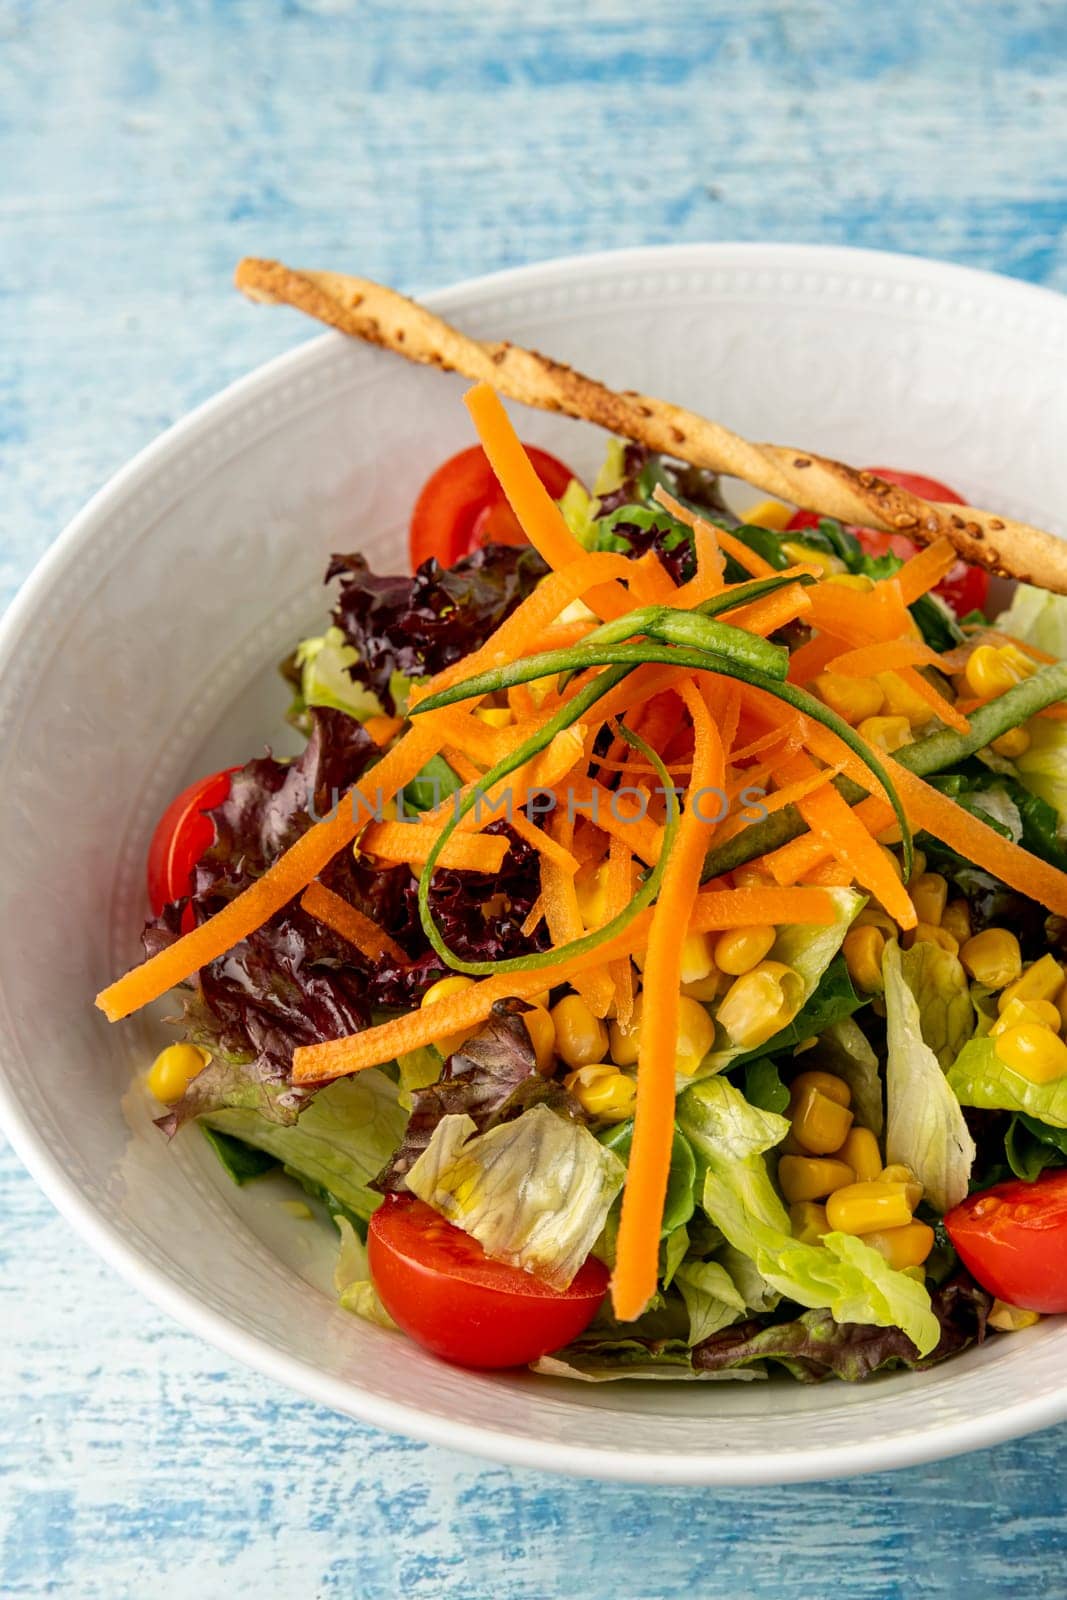 Healthy mixed salad in white bowl on wooden table. Mediterranean salad by Sonat